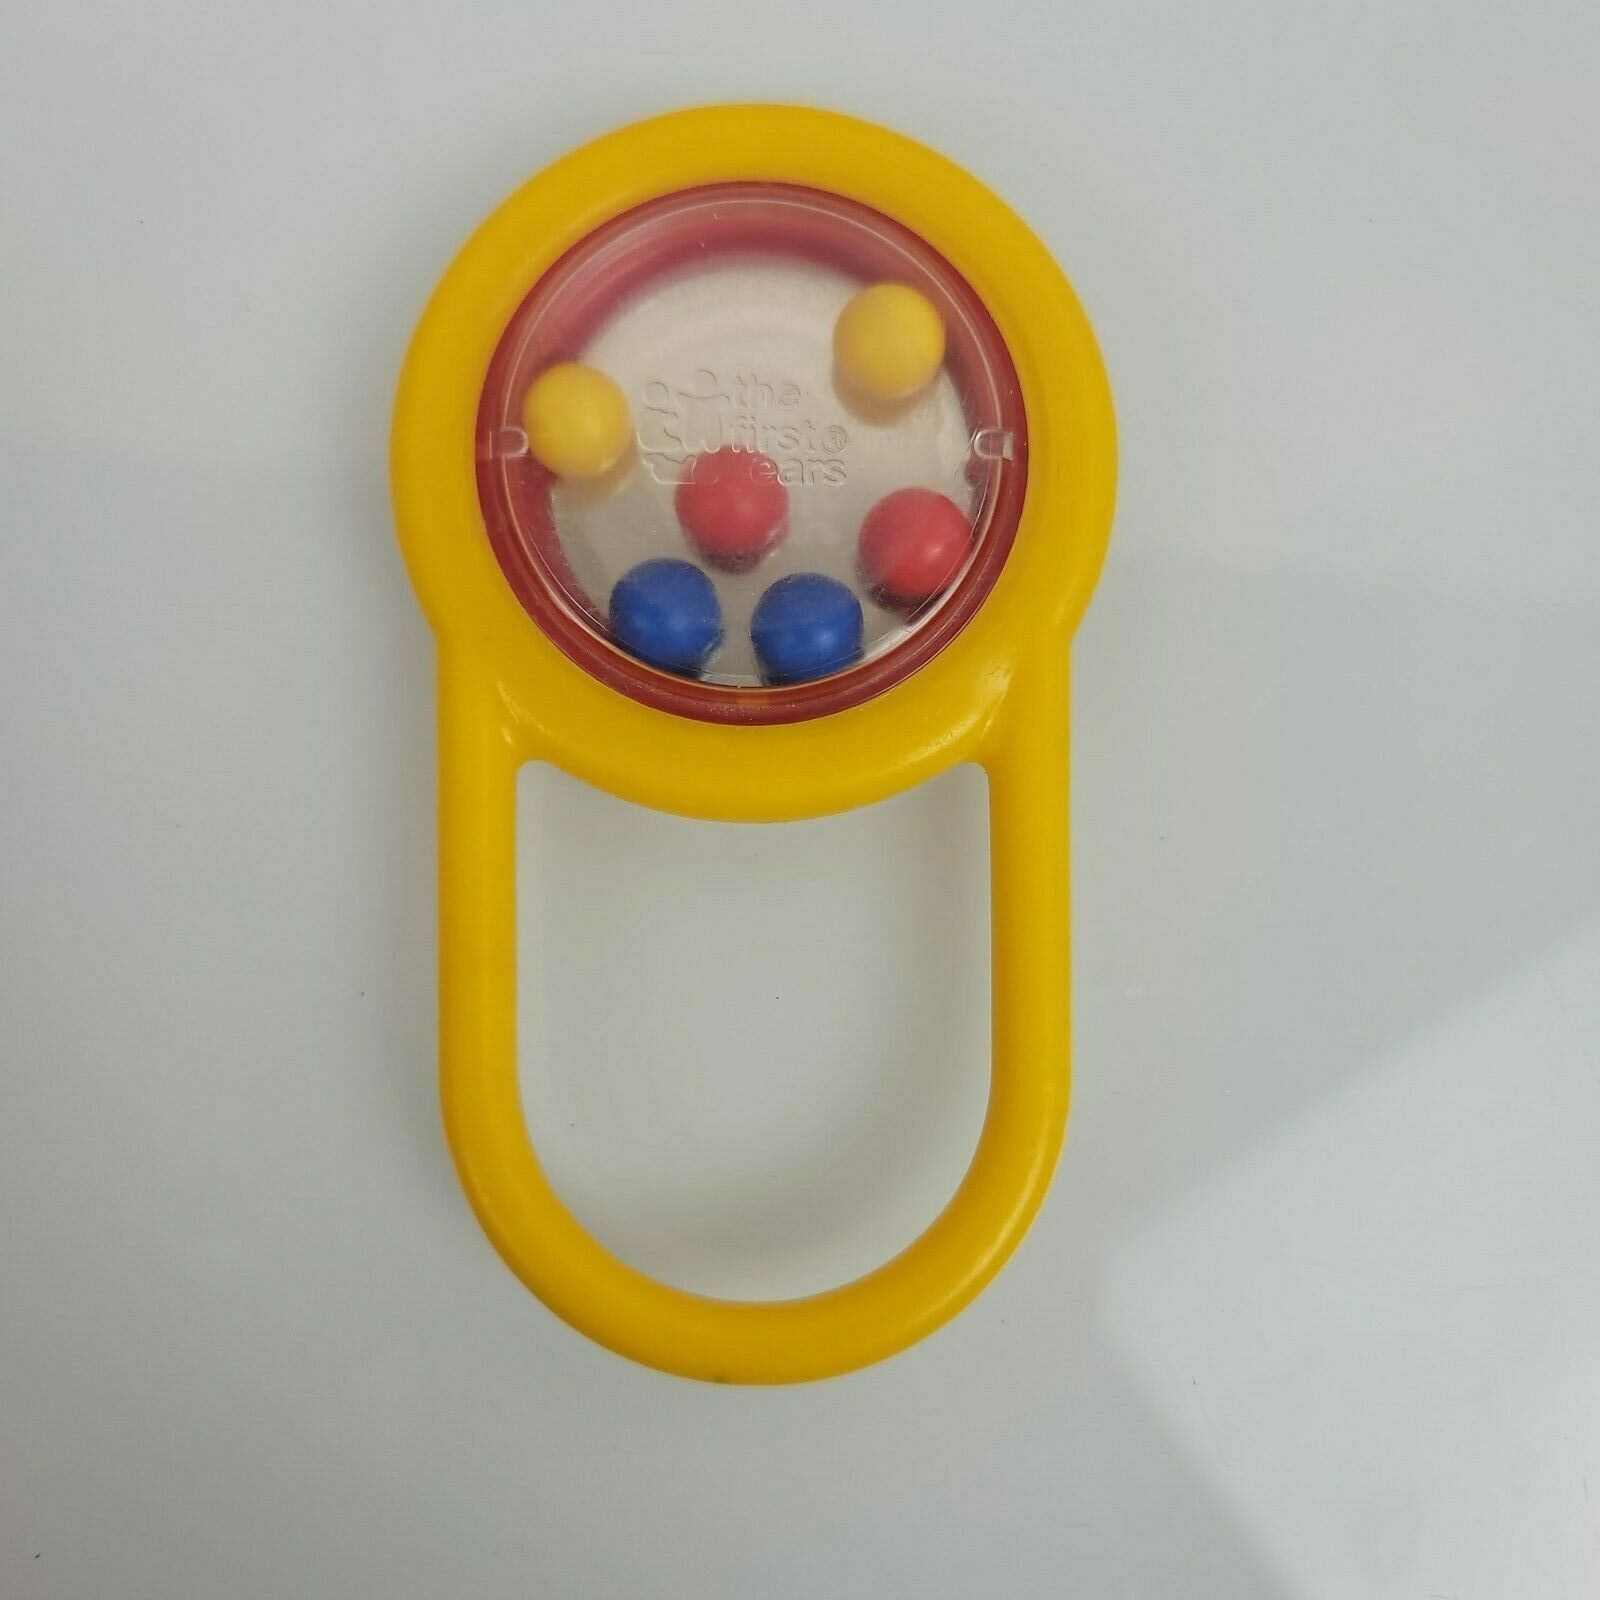 Vintage The First Years Shake & See Rattle Washables 1990s Plastic Toy Yellow  - $17.81